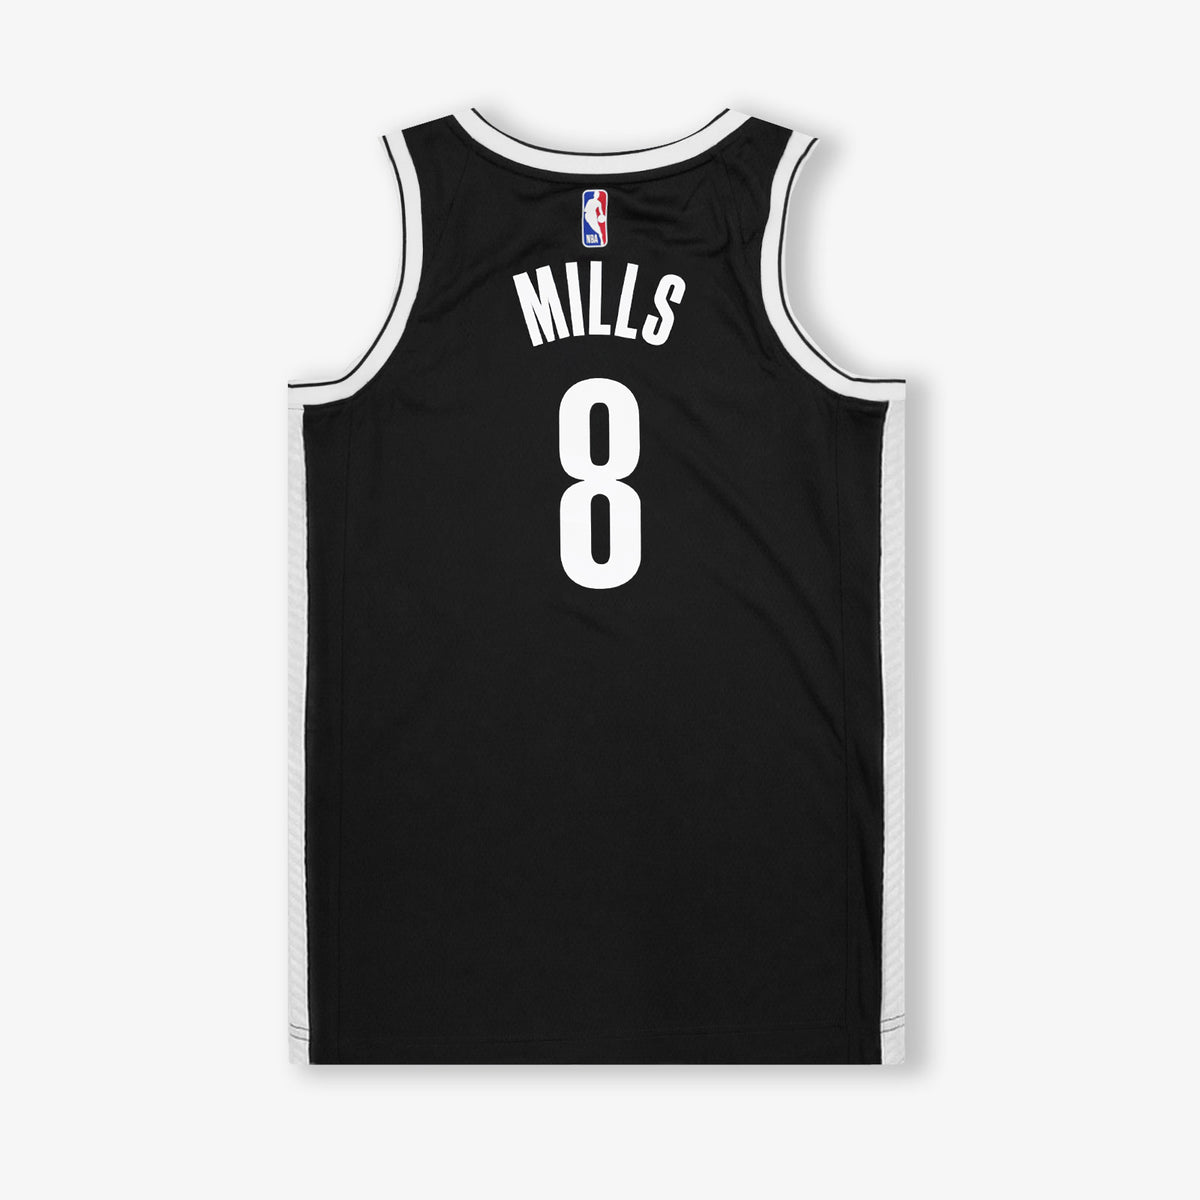 Official Brooklyn Nets Merchandise And Clothing